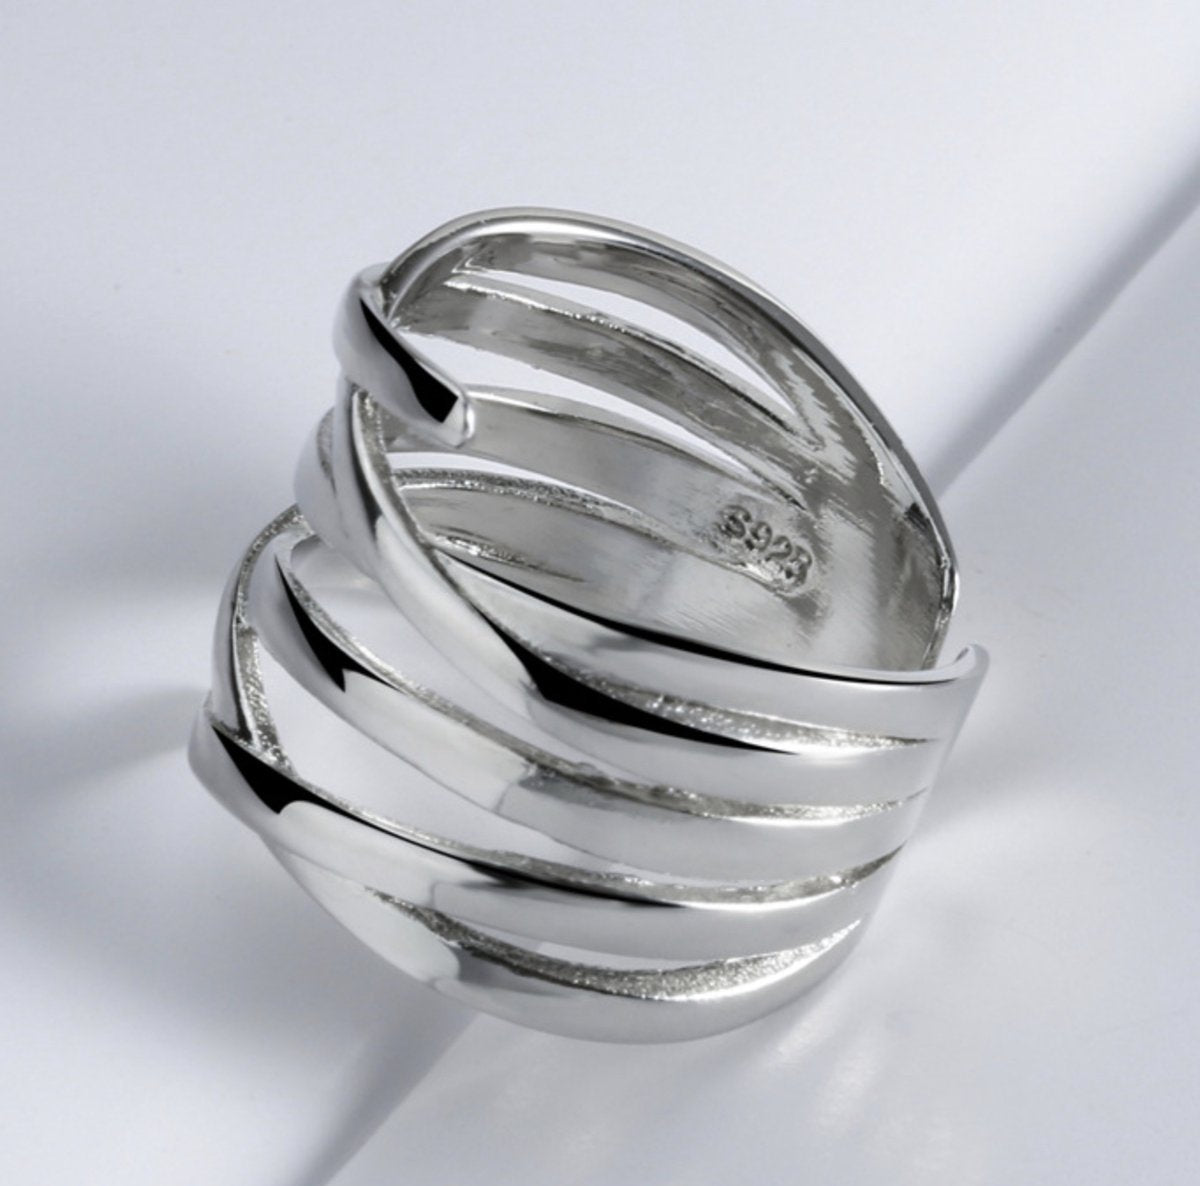 Grote stoere ring, zilver